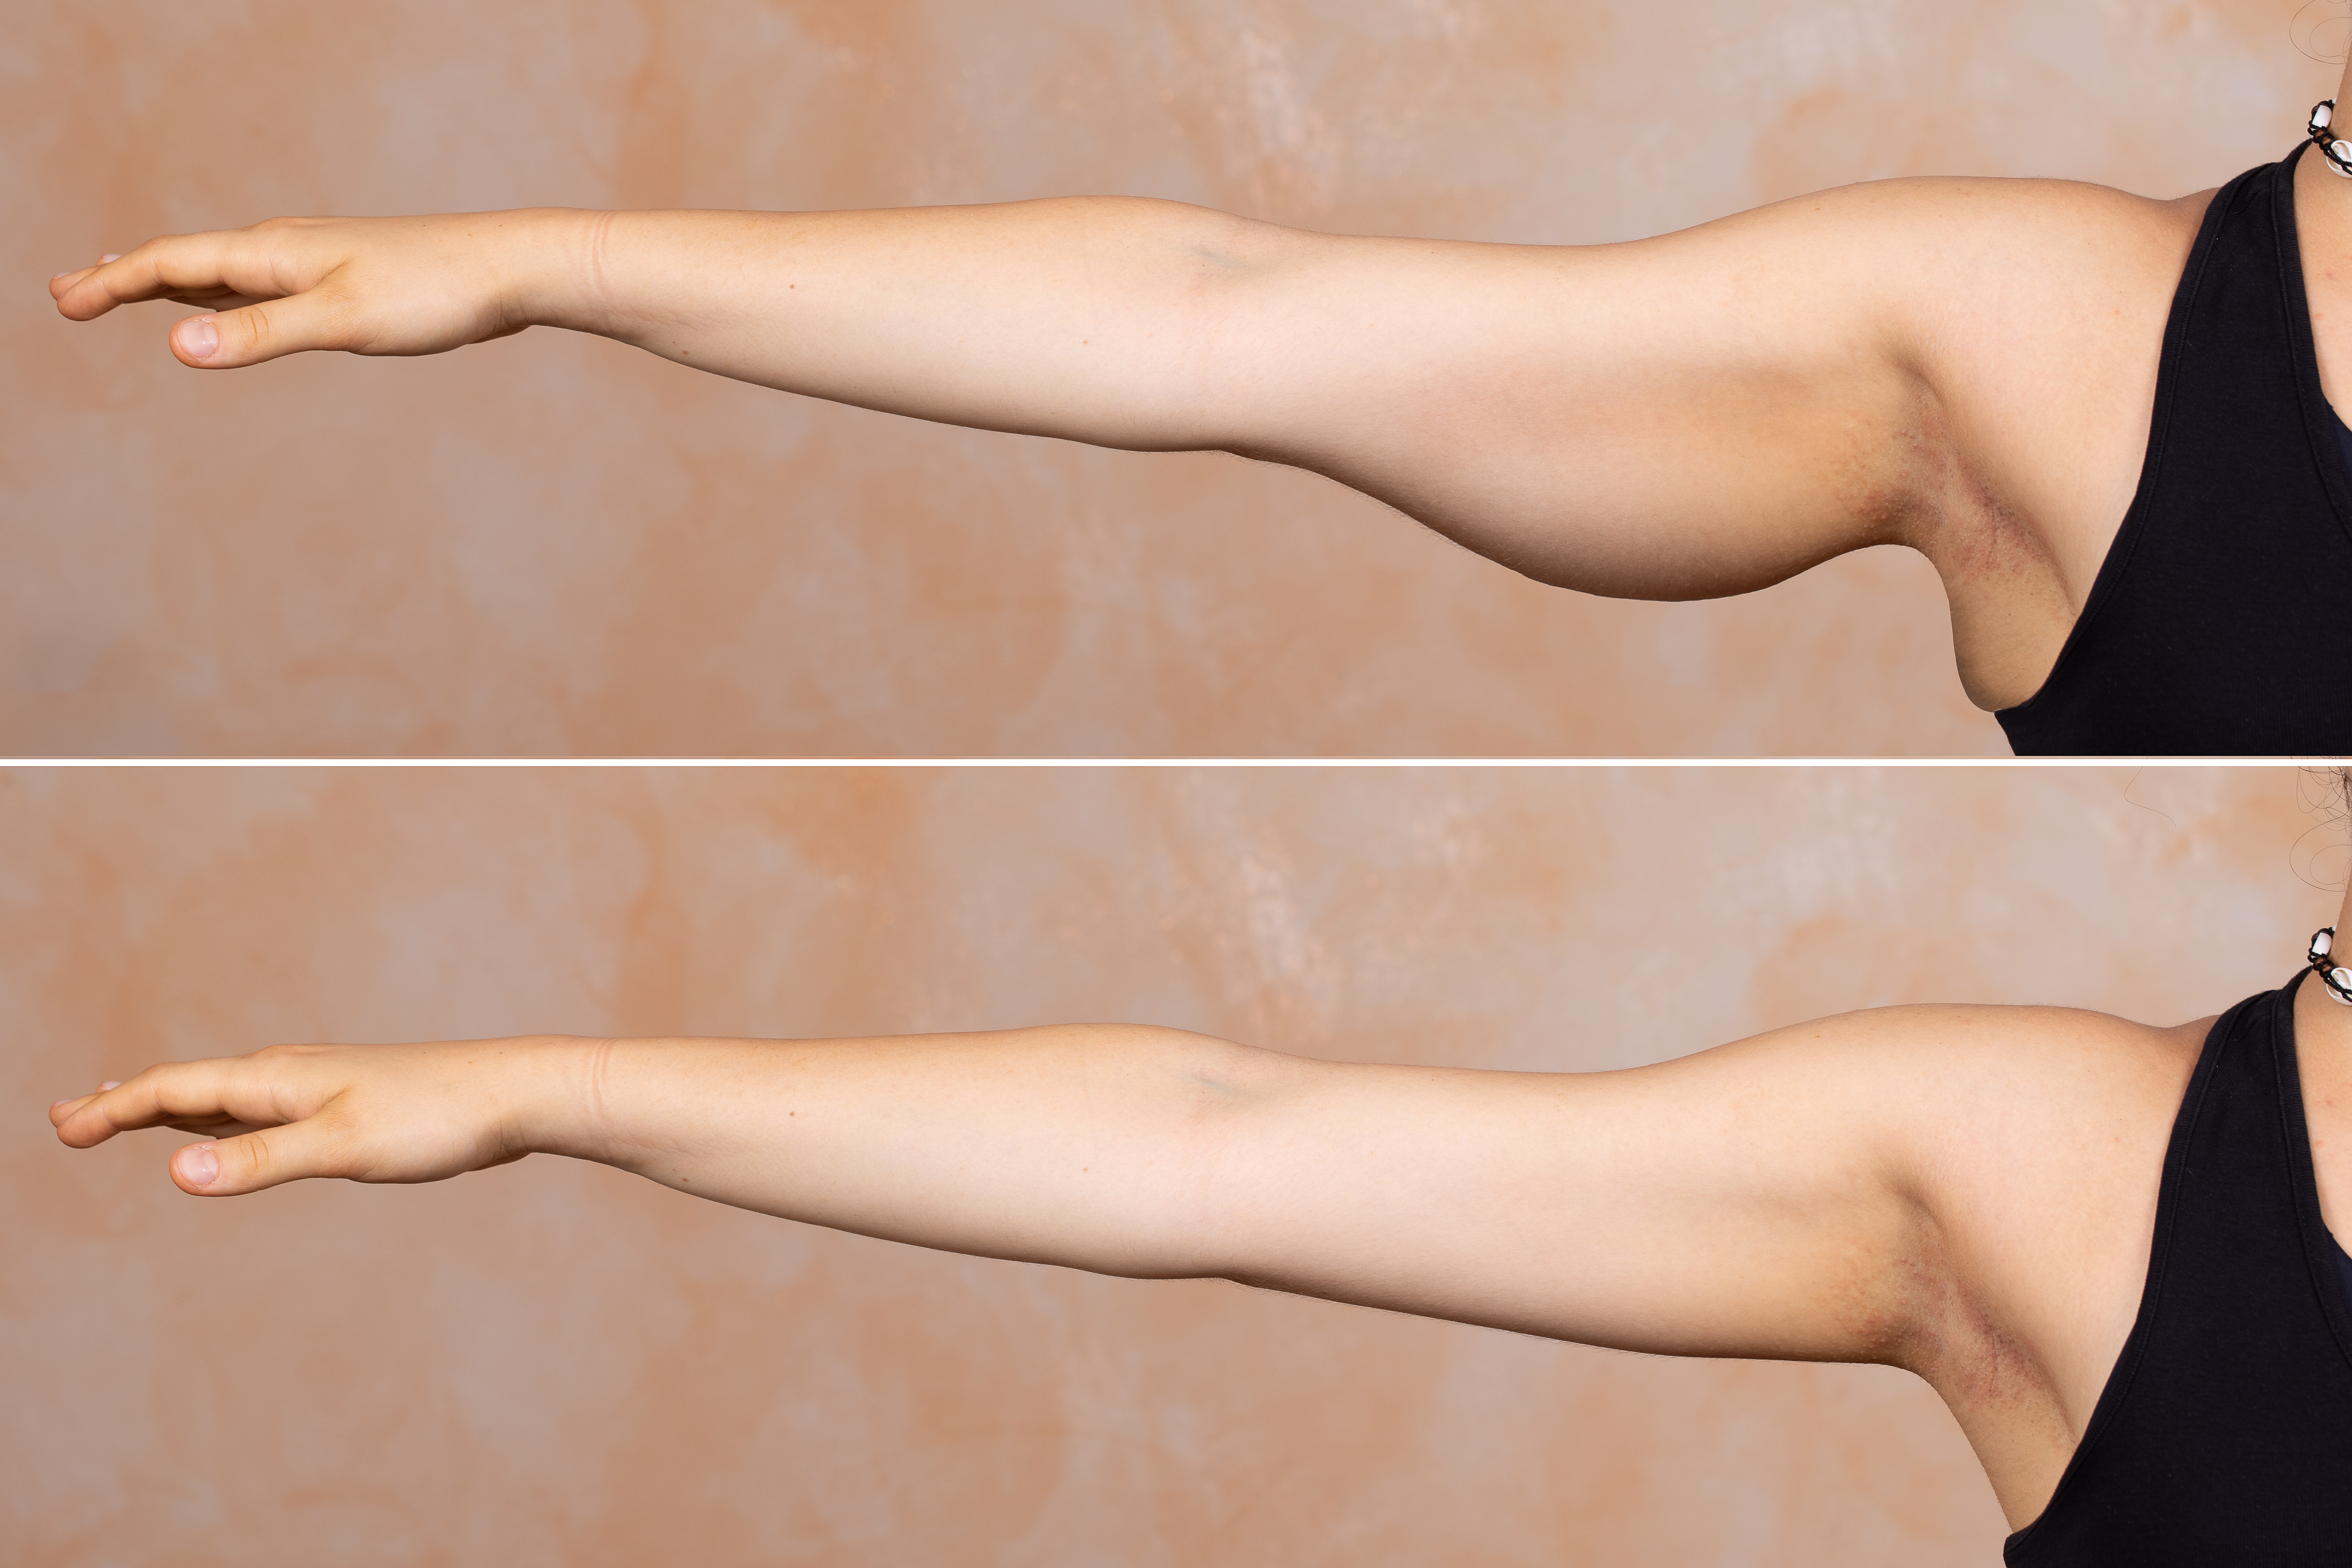 Permanent Arm Fat Removal  Arm Liposuction With AirSculpt®